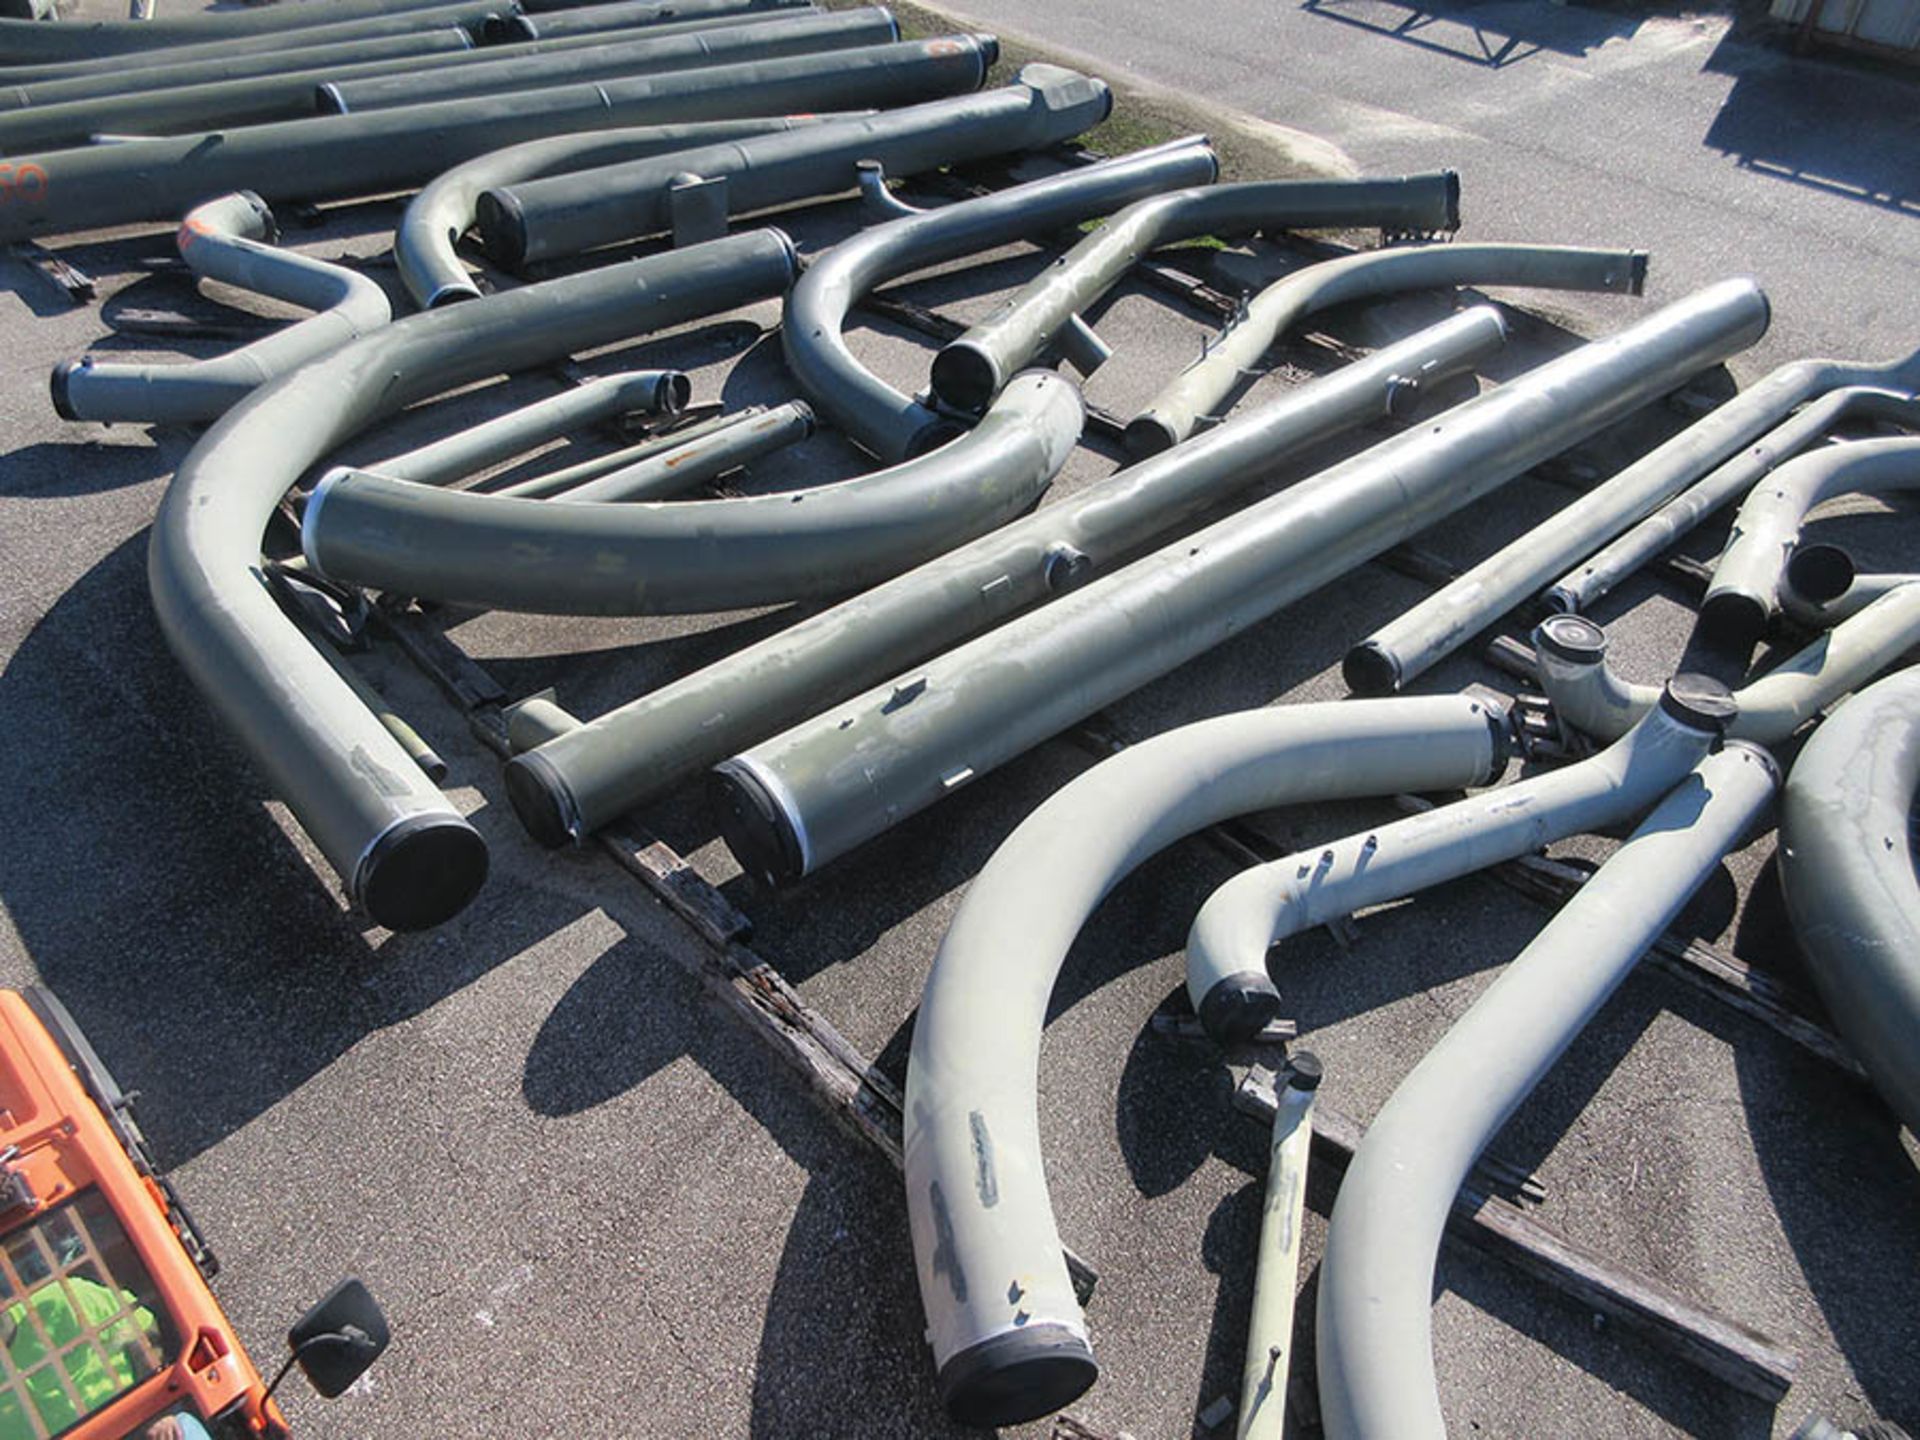 LARGE LOT OF ASSORTED PIPE: 6'' TO 30'' DIA. UP TO 576'', 1,000 LB. - 37,193 LB., LOCATION: GRID 4D